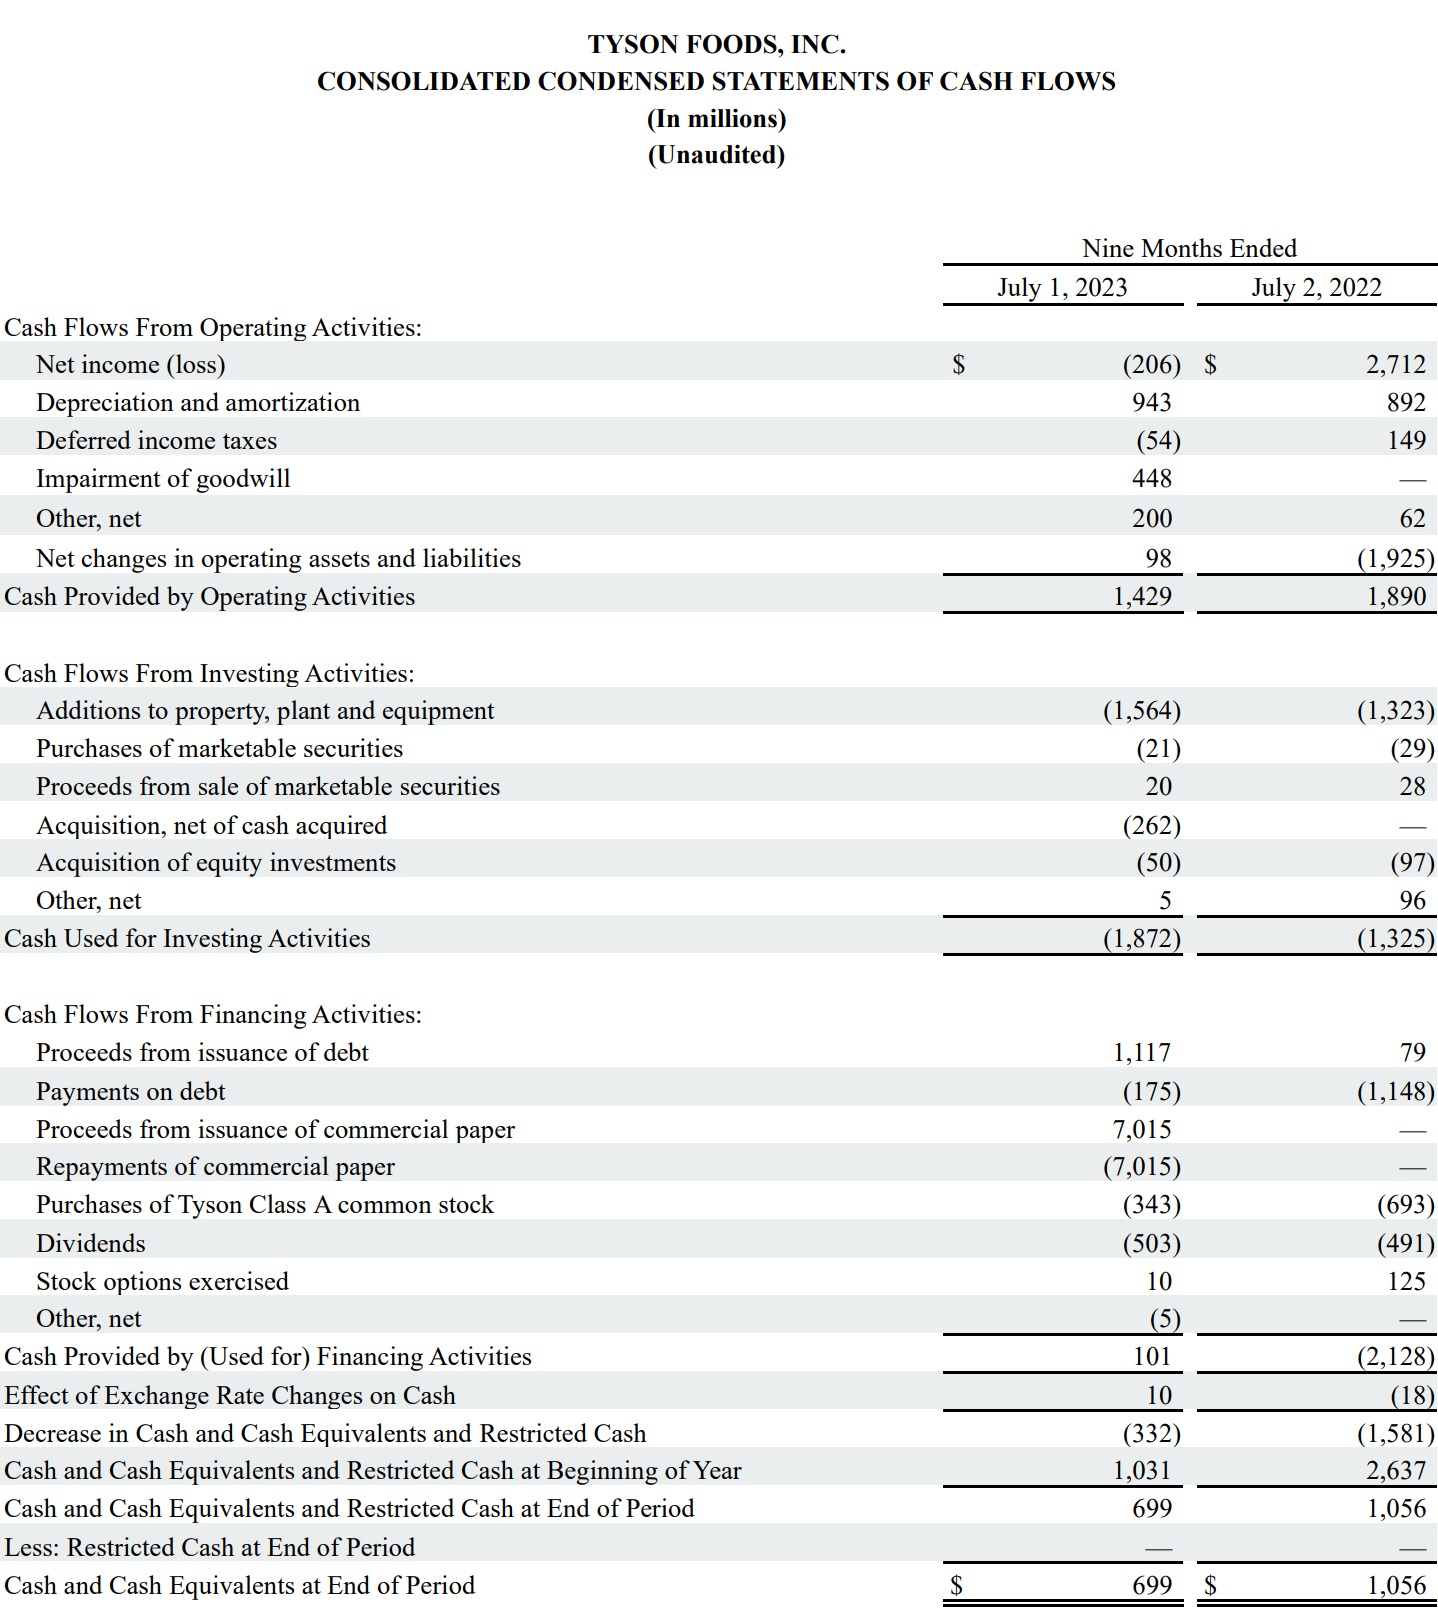 Image of table showing consolidated condensed statements of cash flows